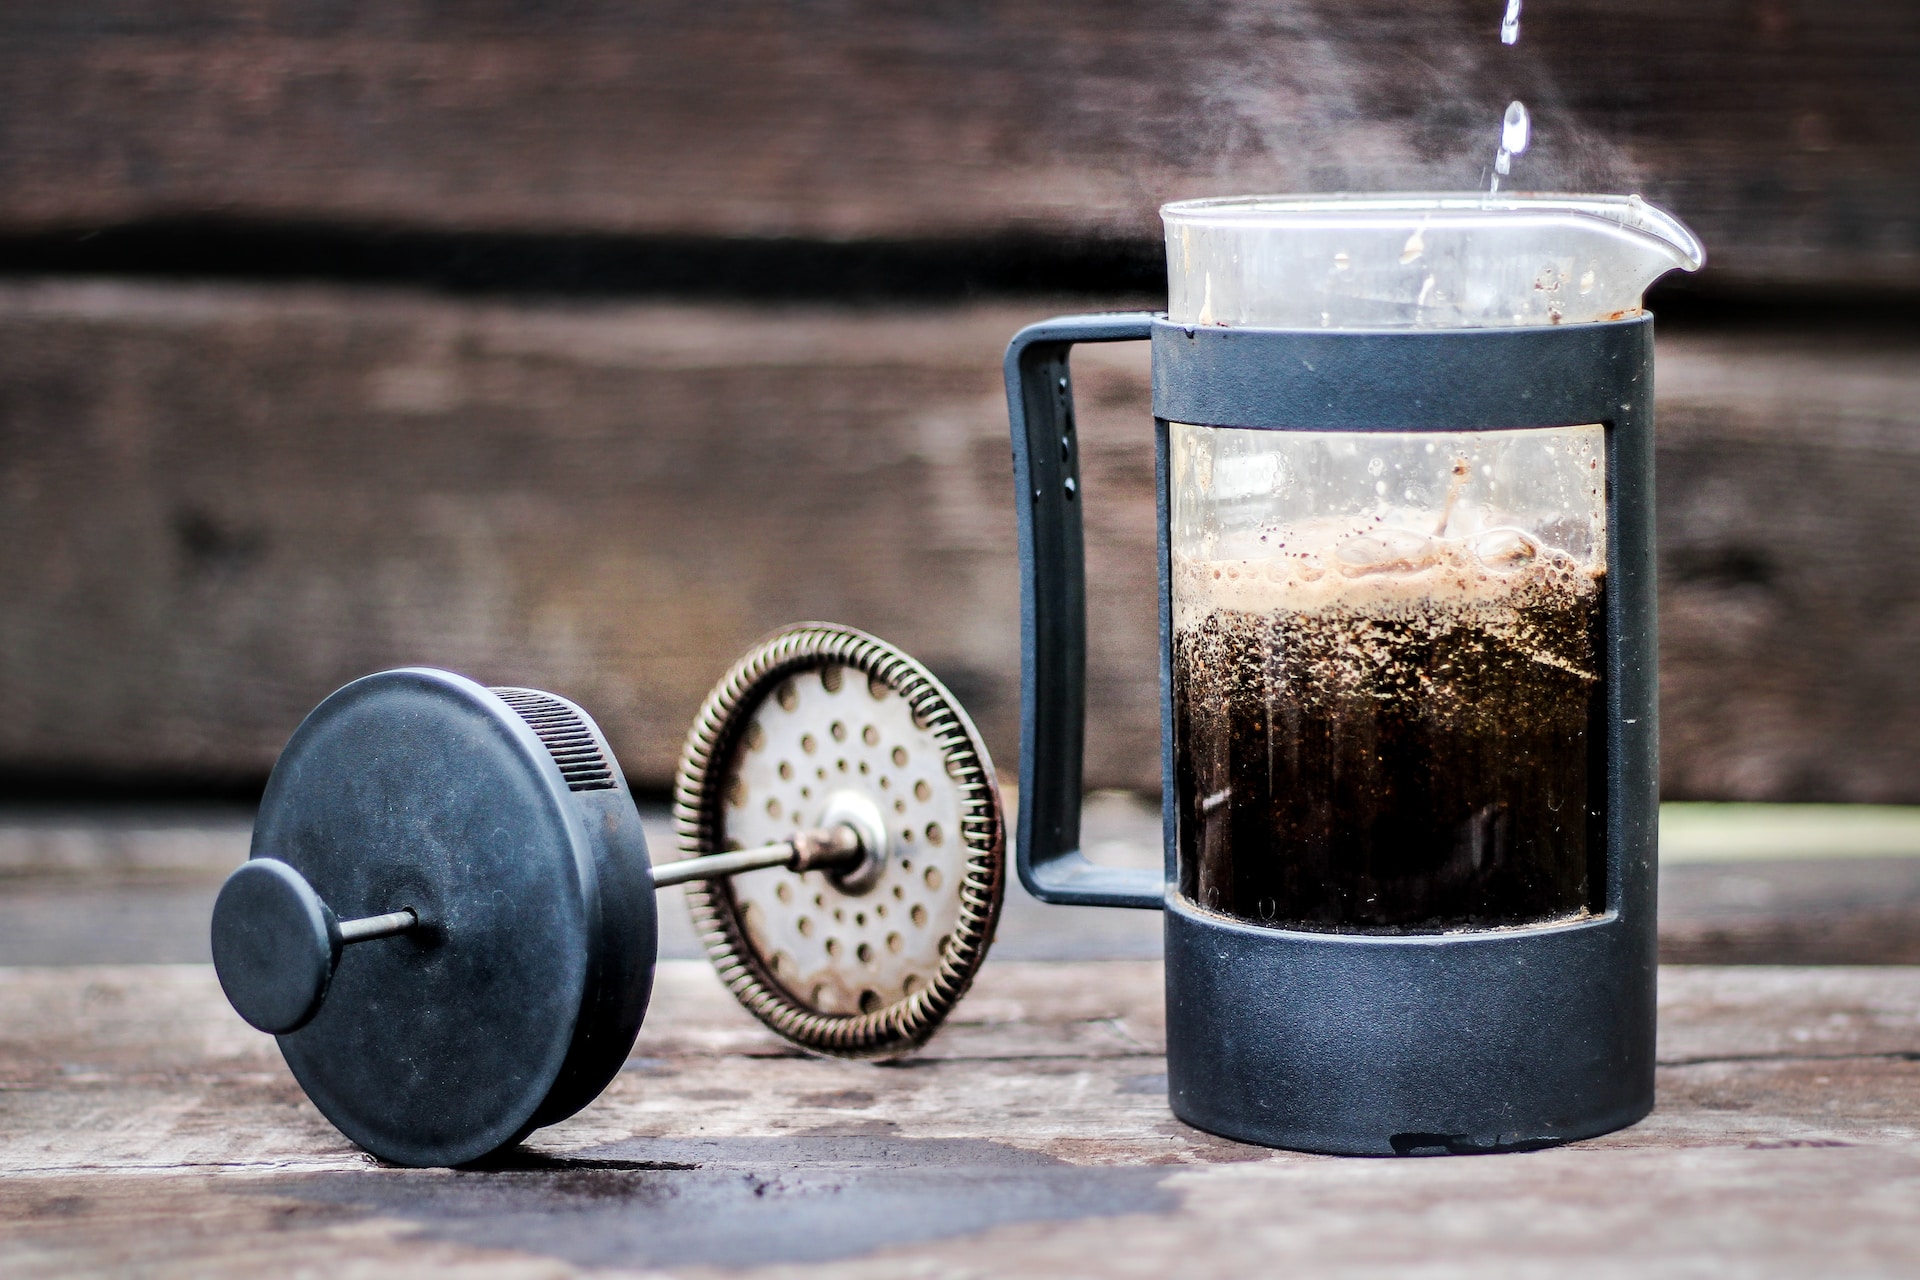 Brewing coffee with French Press style